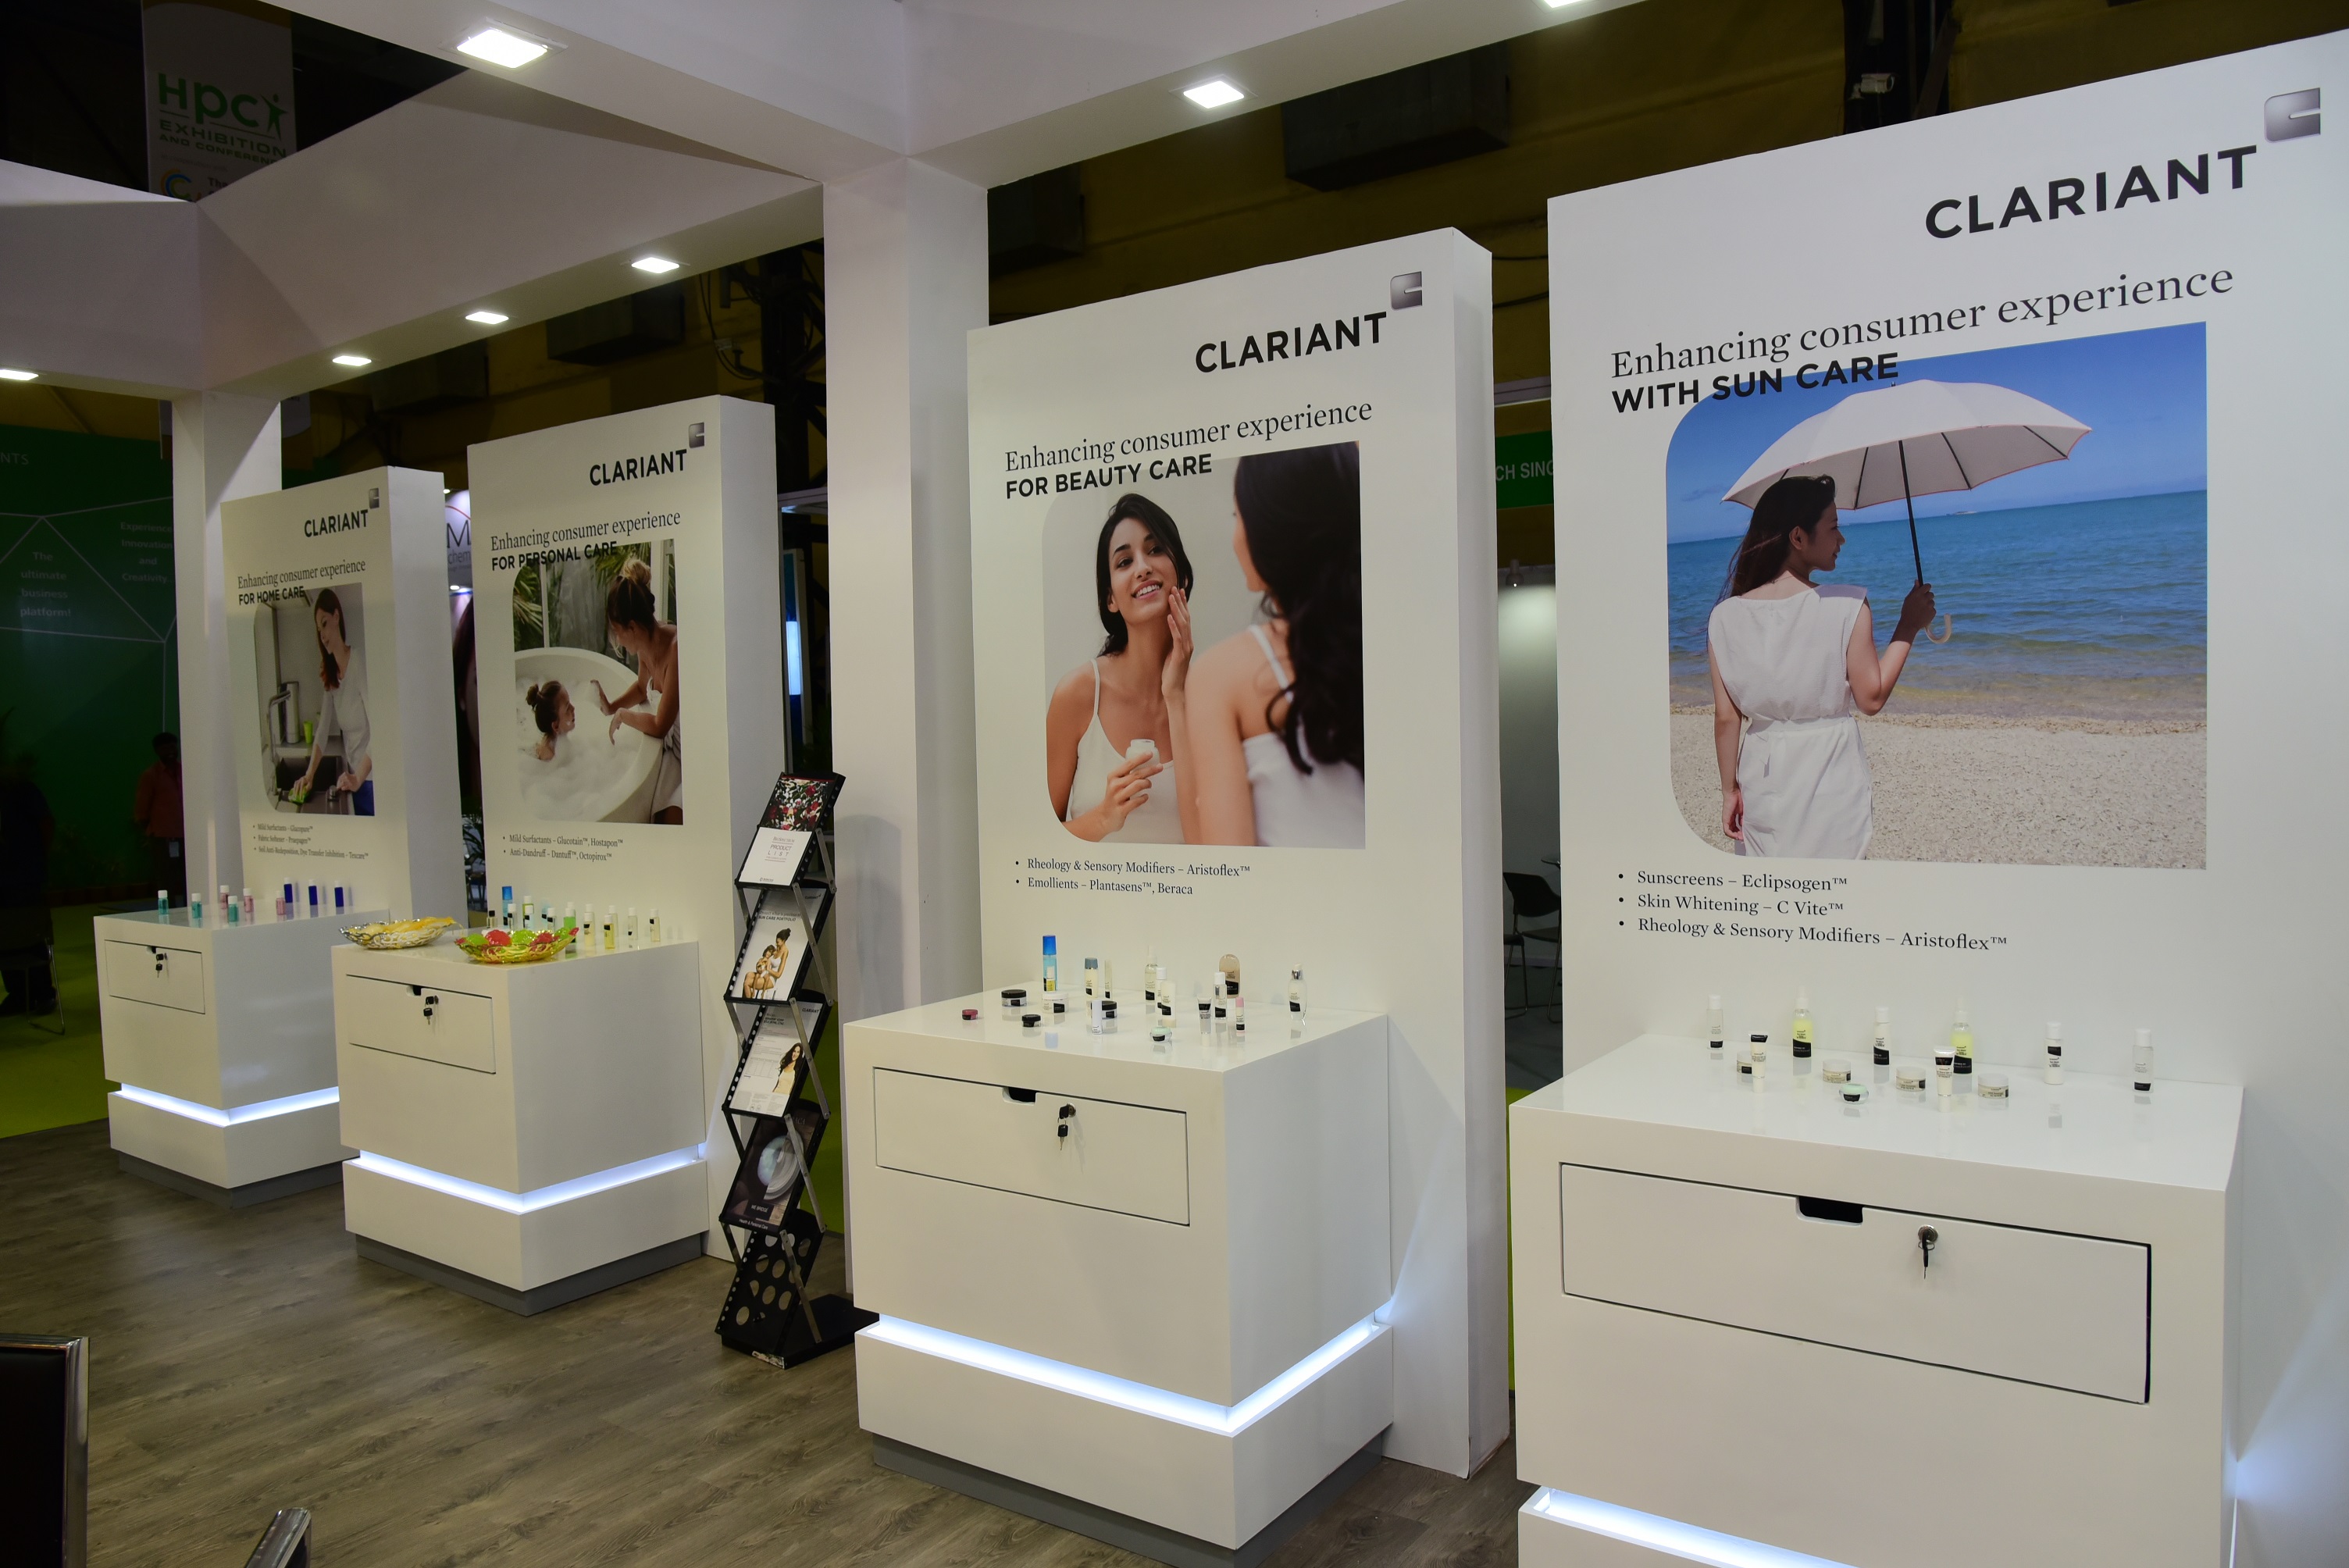 Clariant presents formulation inspirations to enhance consumer experience. (Photo: Clariant)